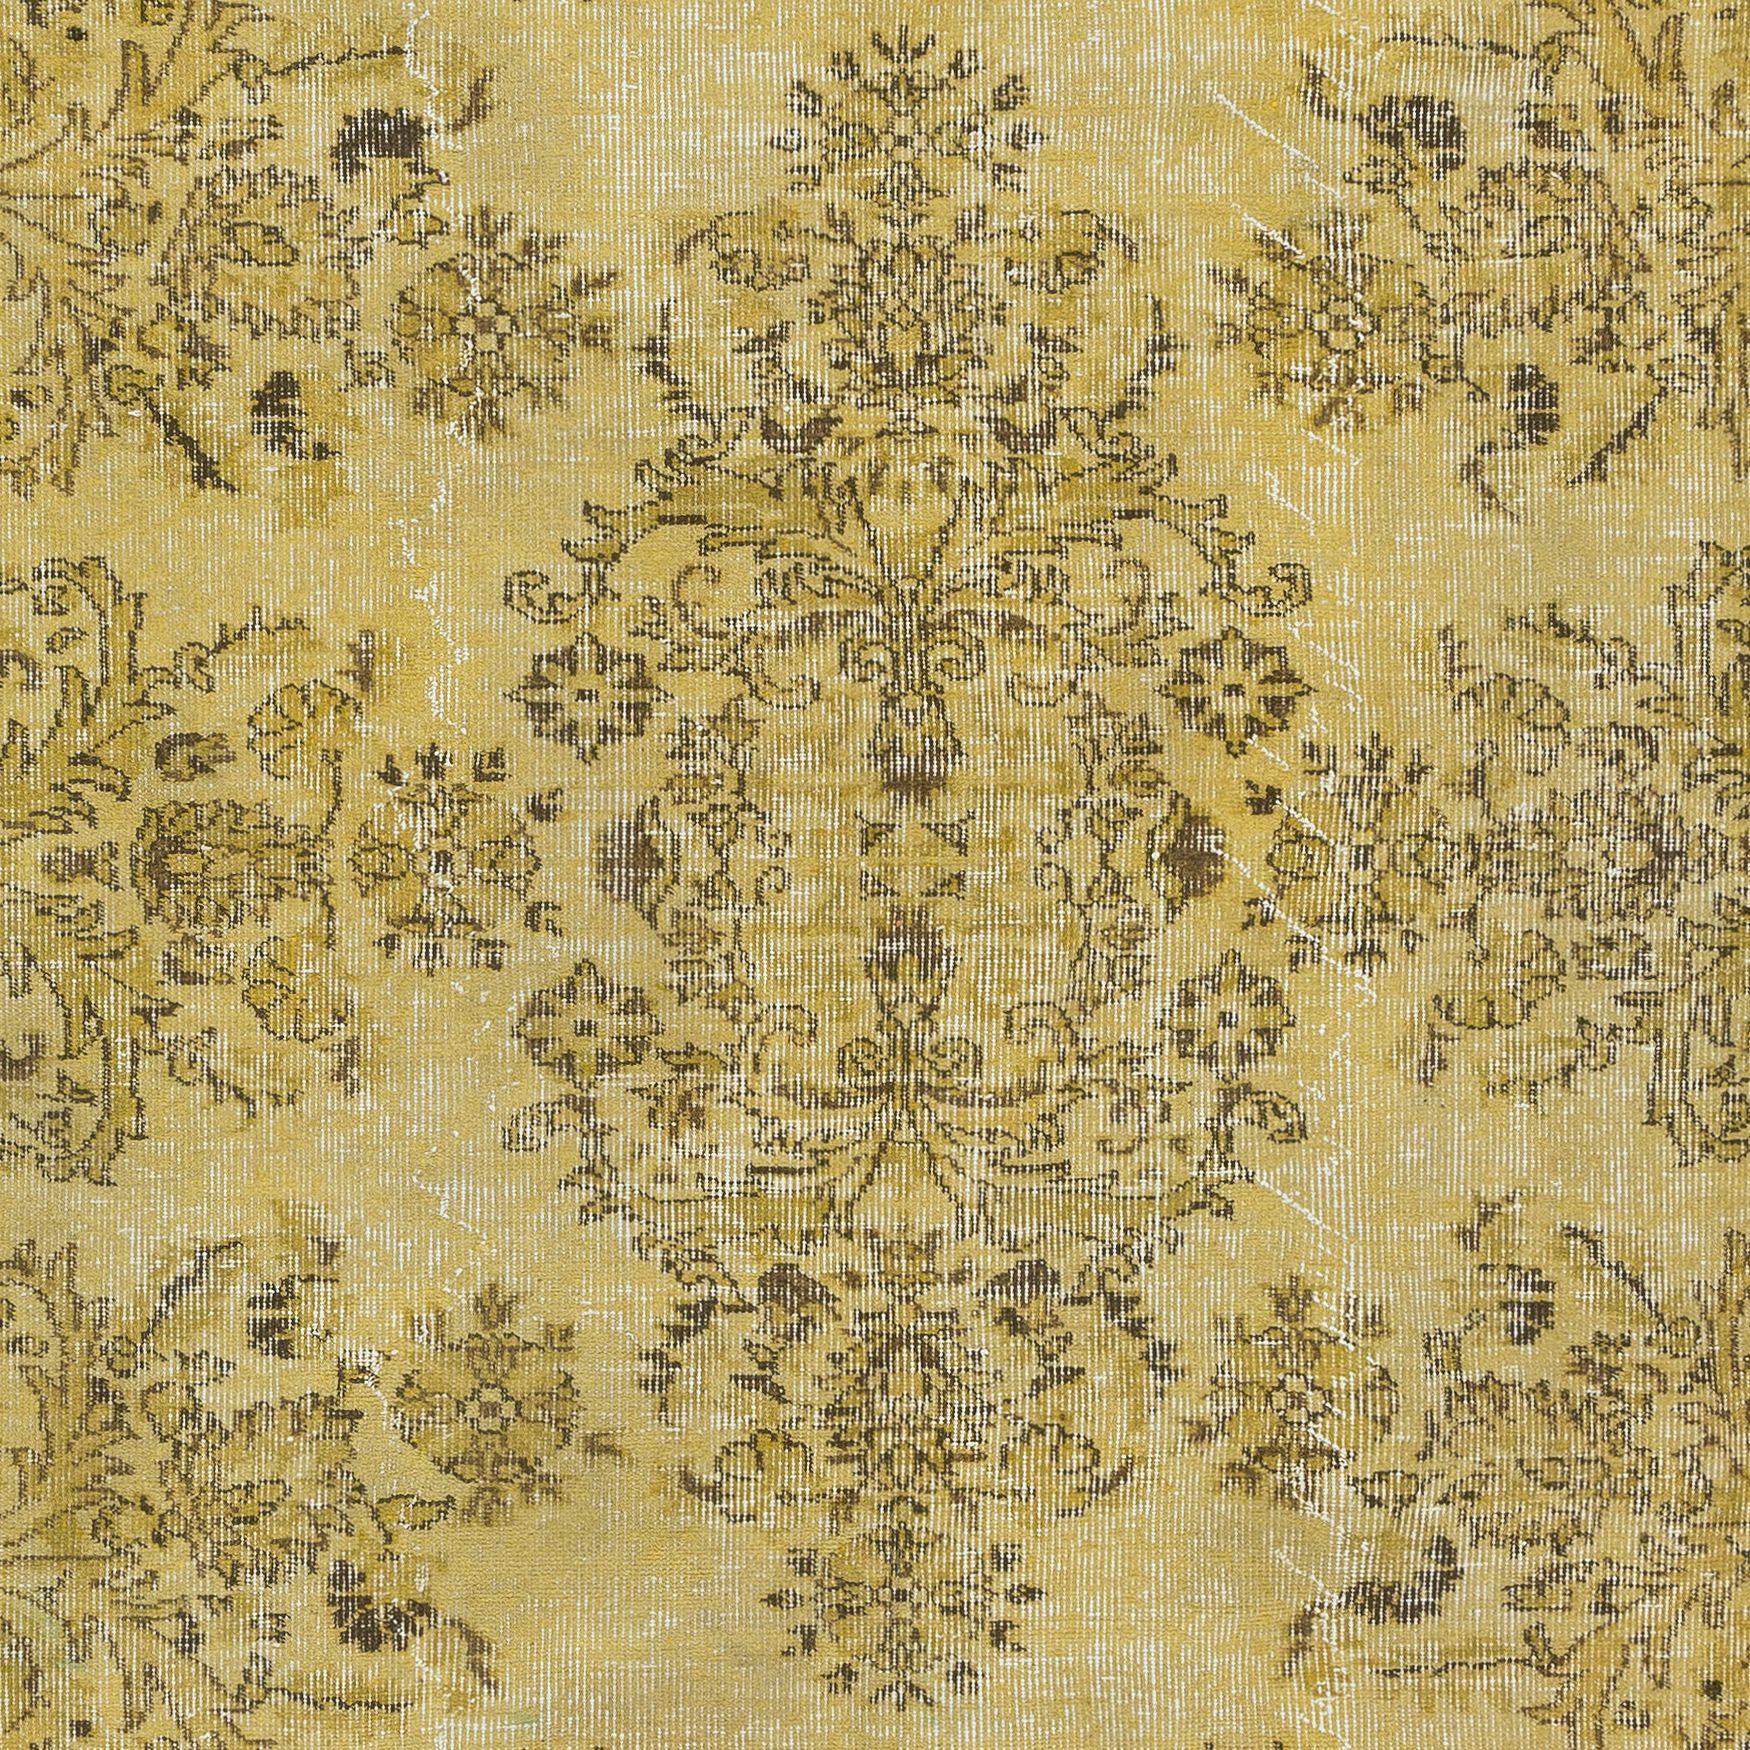 Hand-Knotted 5.7x9.5 Ft Modern Hand Knotted Turkish Wool Area Rug Re-Dyed in Yellow For Sale